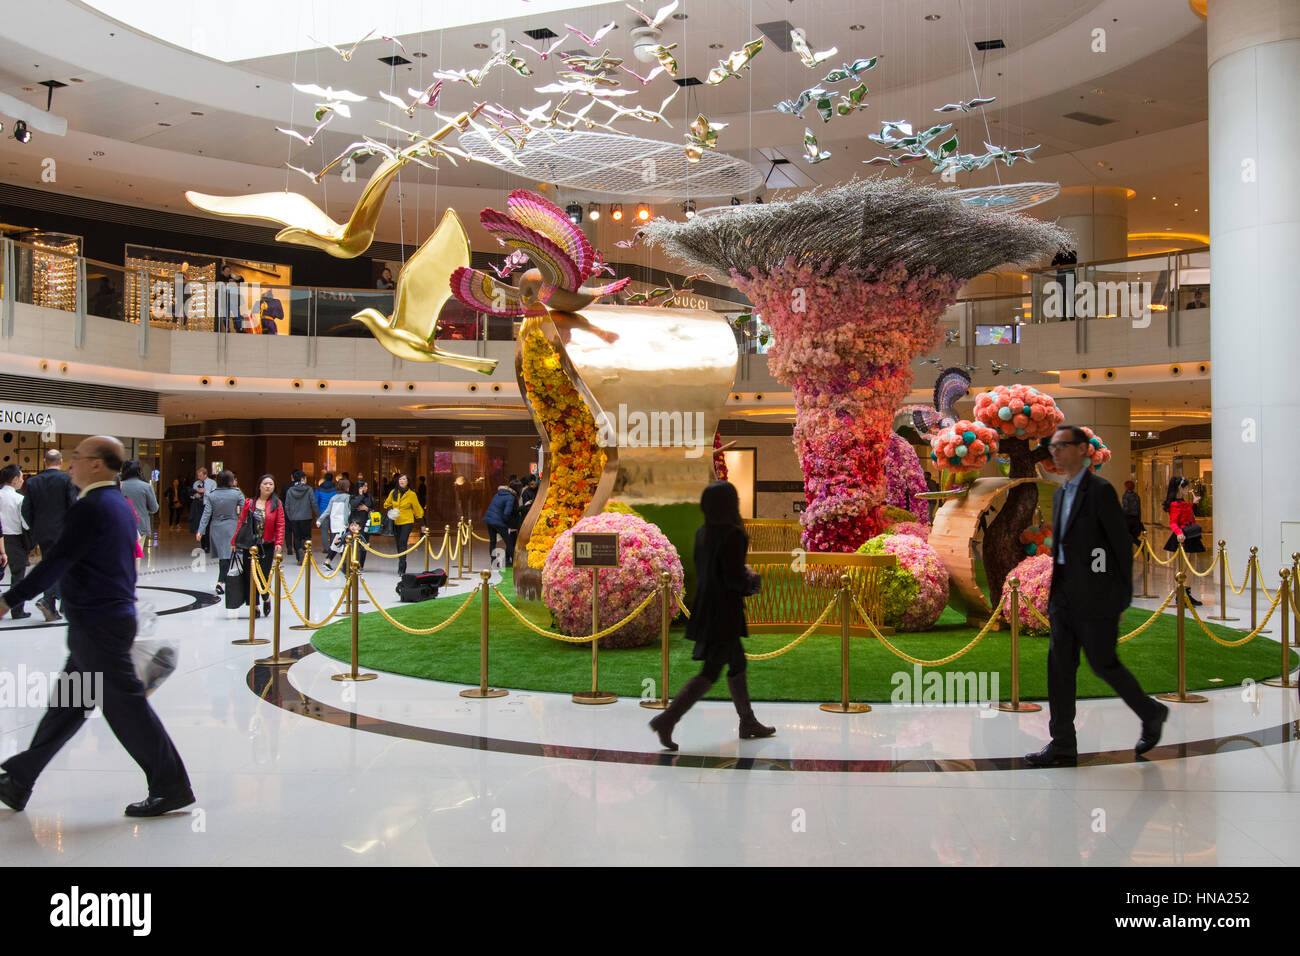 The arium in Elements Mall in Hong Kong Stock Photo